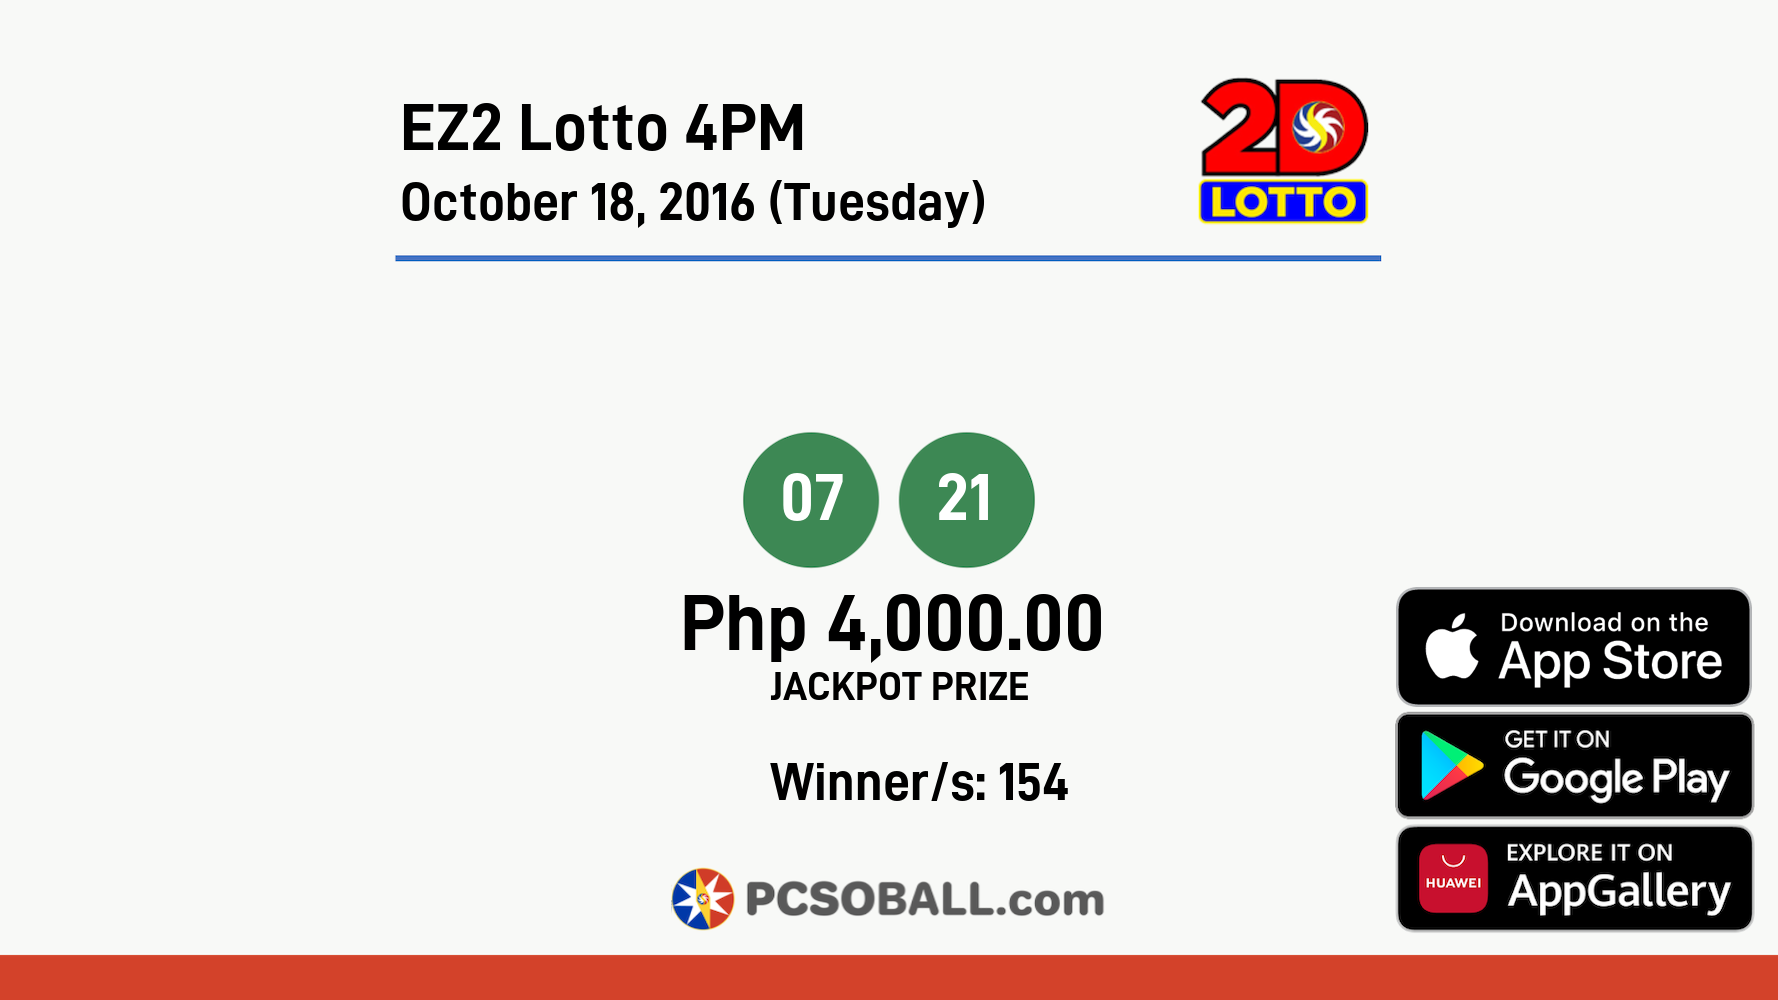 EZ2 Lotto 4PM October 18, 2016 (Tuesday) Result